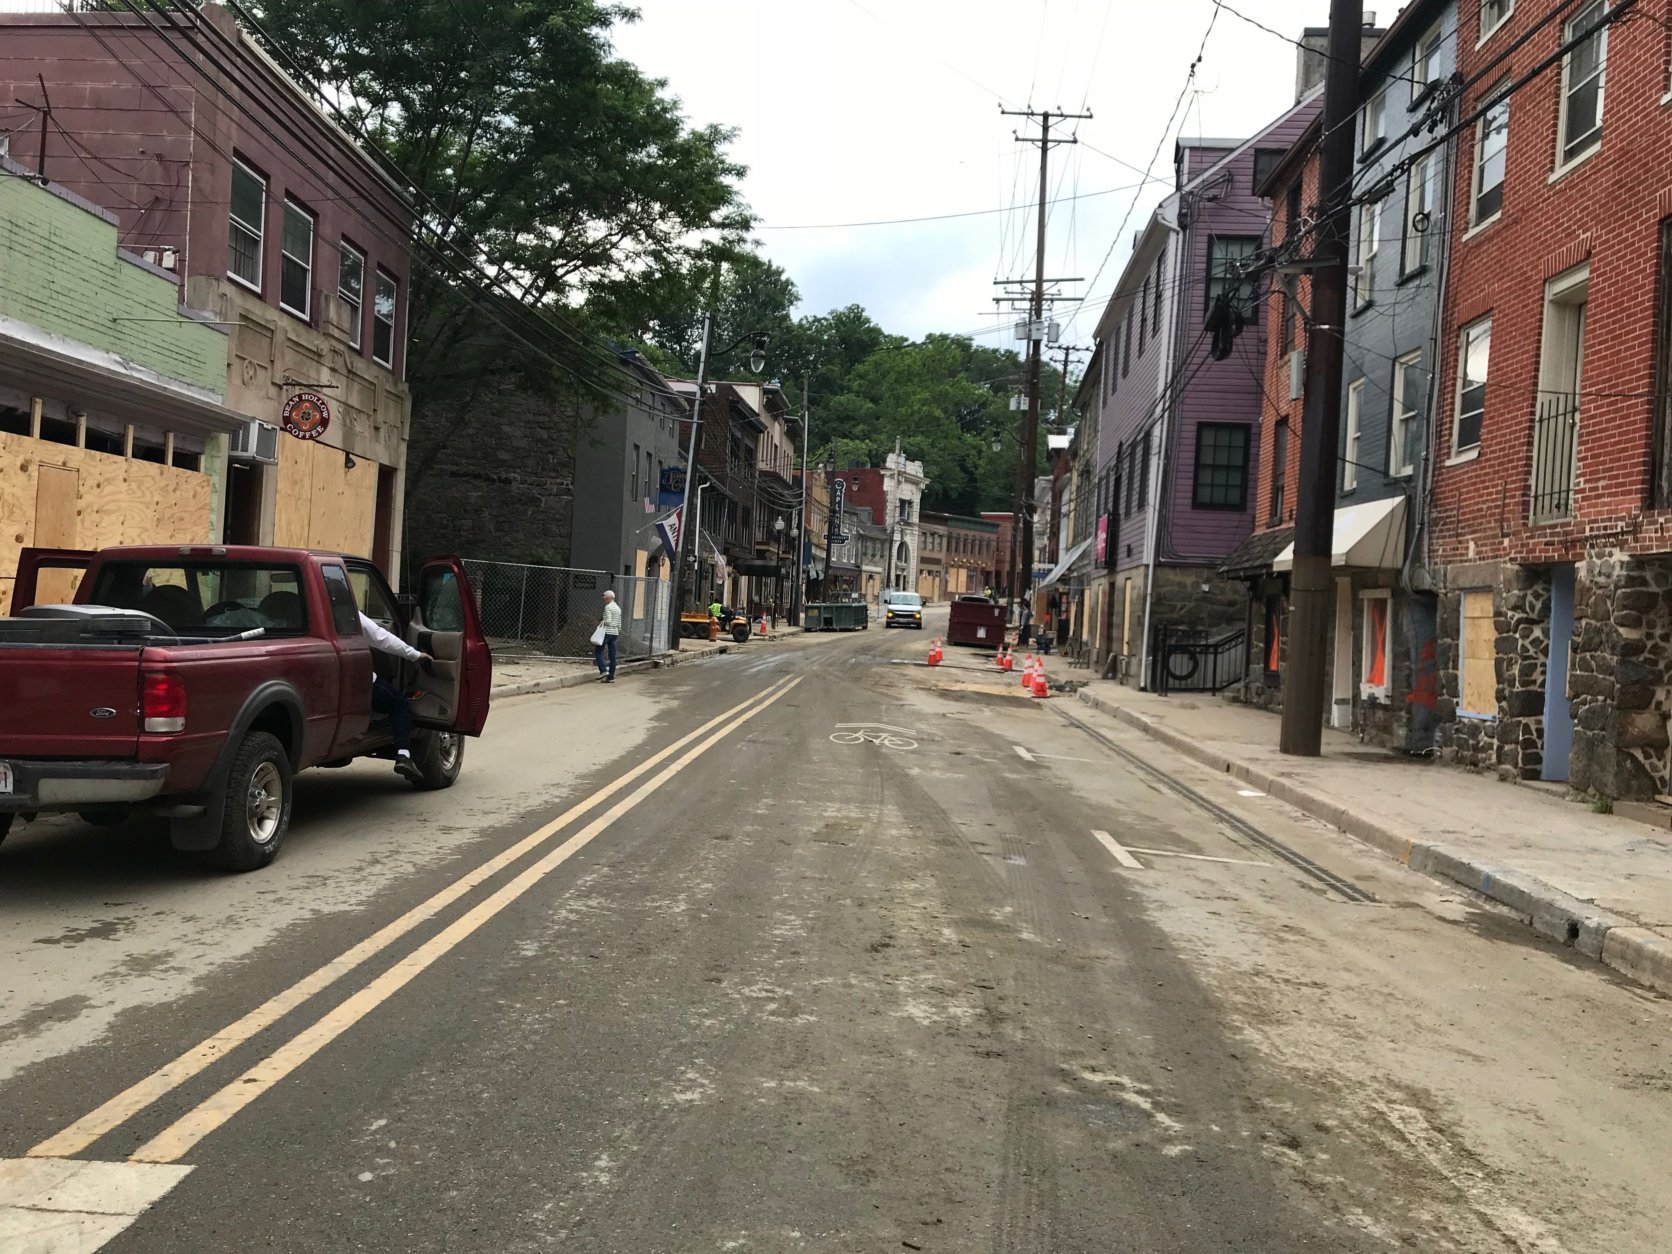 "I think right now the people of Ellicott City have continued to show their strength and resilience, and continue to amaze the whole world. And so I think we're doing well. I think right now most business owners will tell you they're probably weeks ahead of schedule than they were two years ago," said Kittleman, referring to the extensive damage caused by the 2016 flood. (WTOP/Dick Uliano)